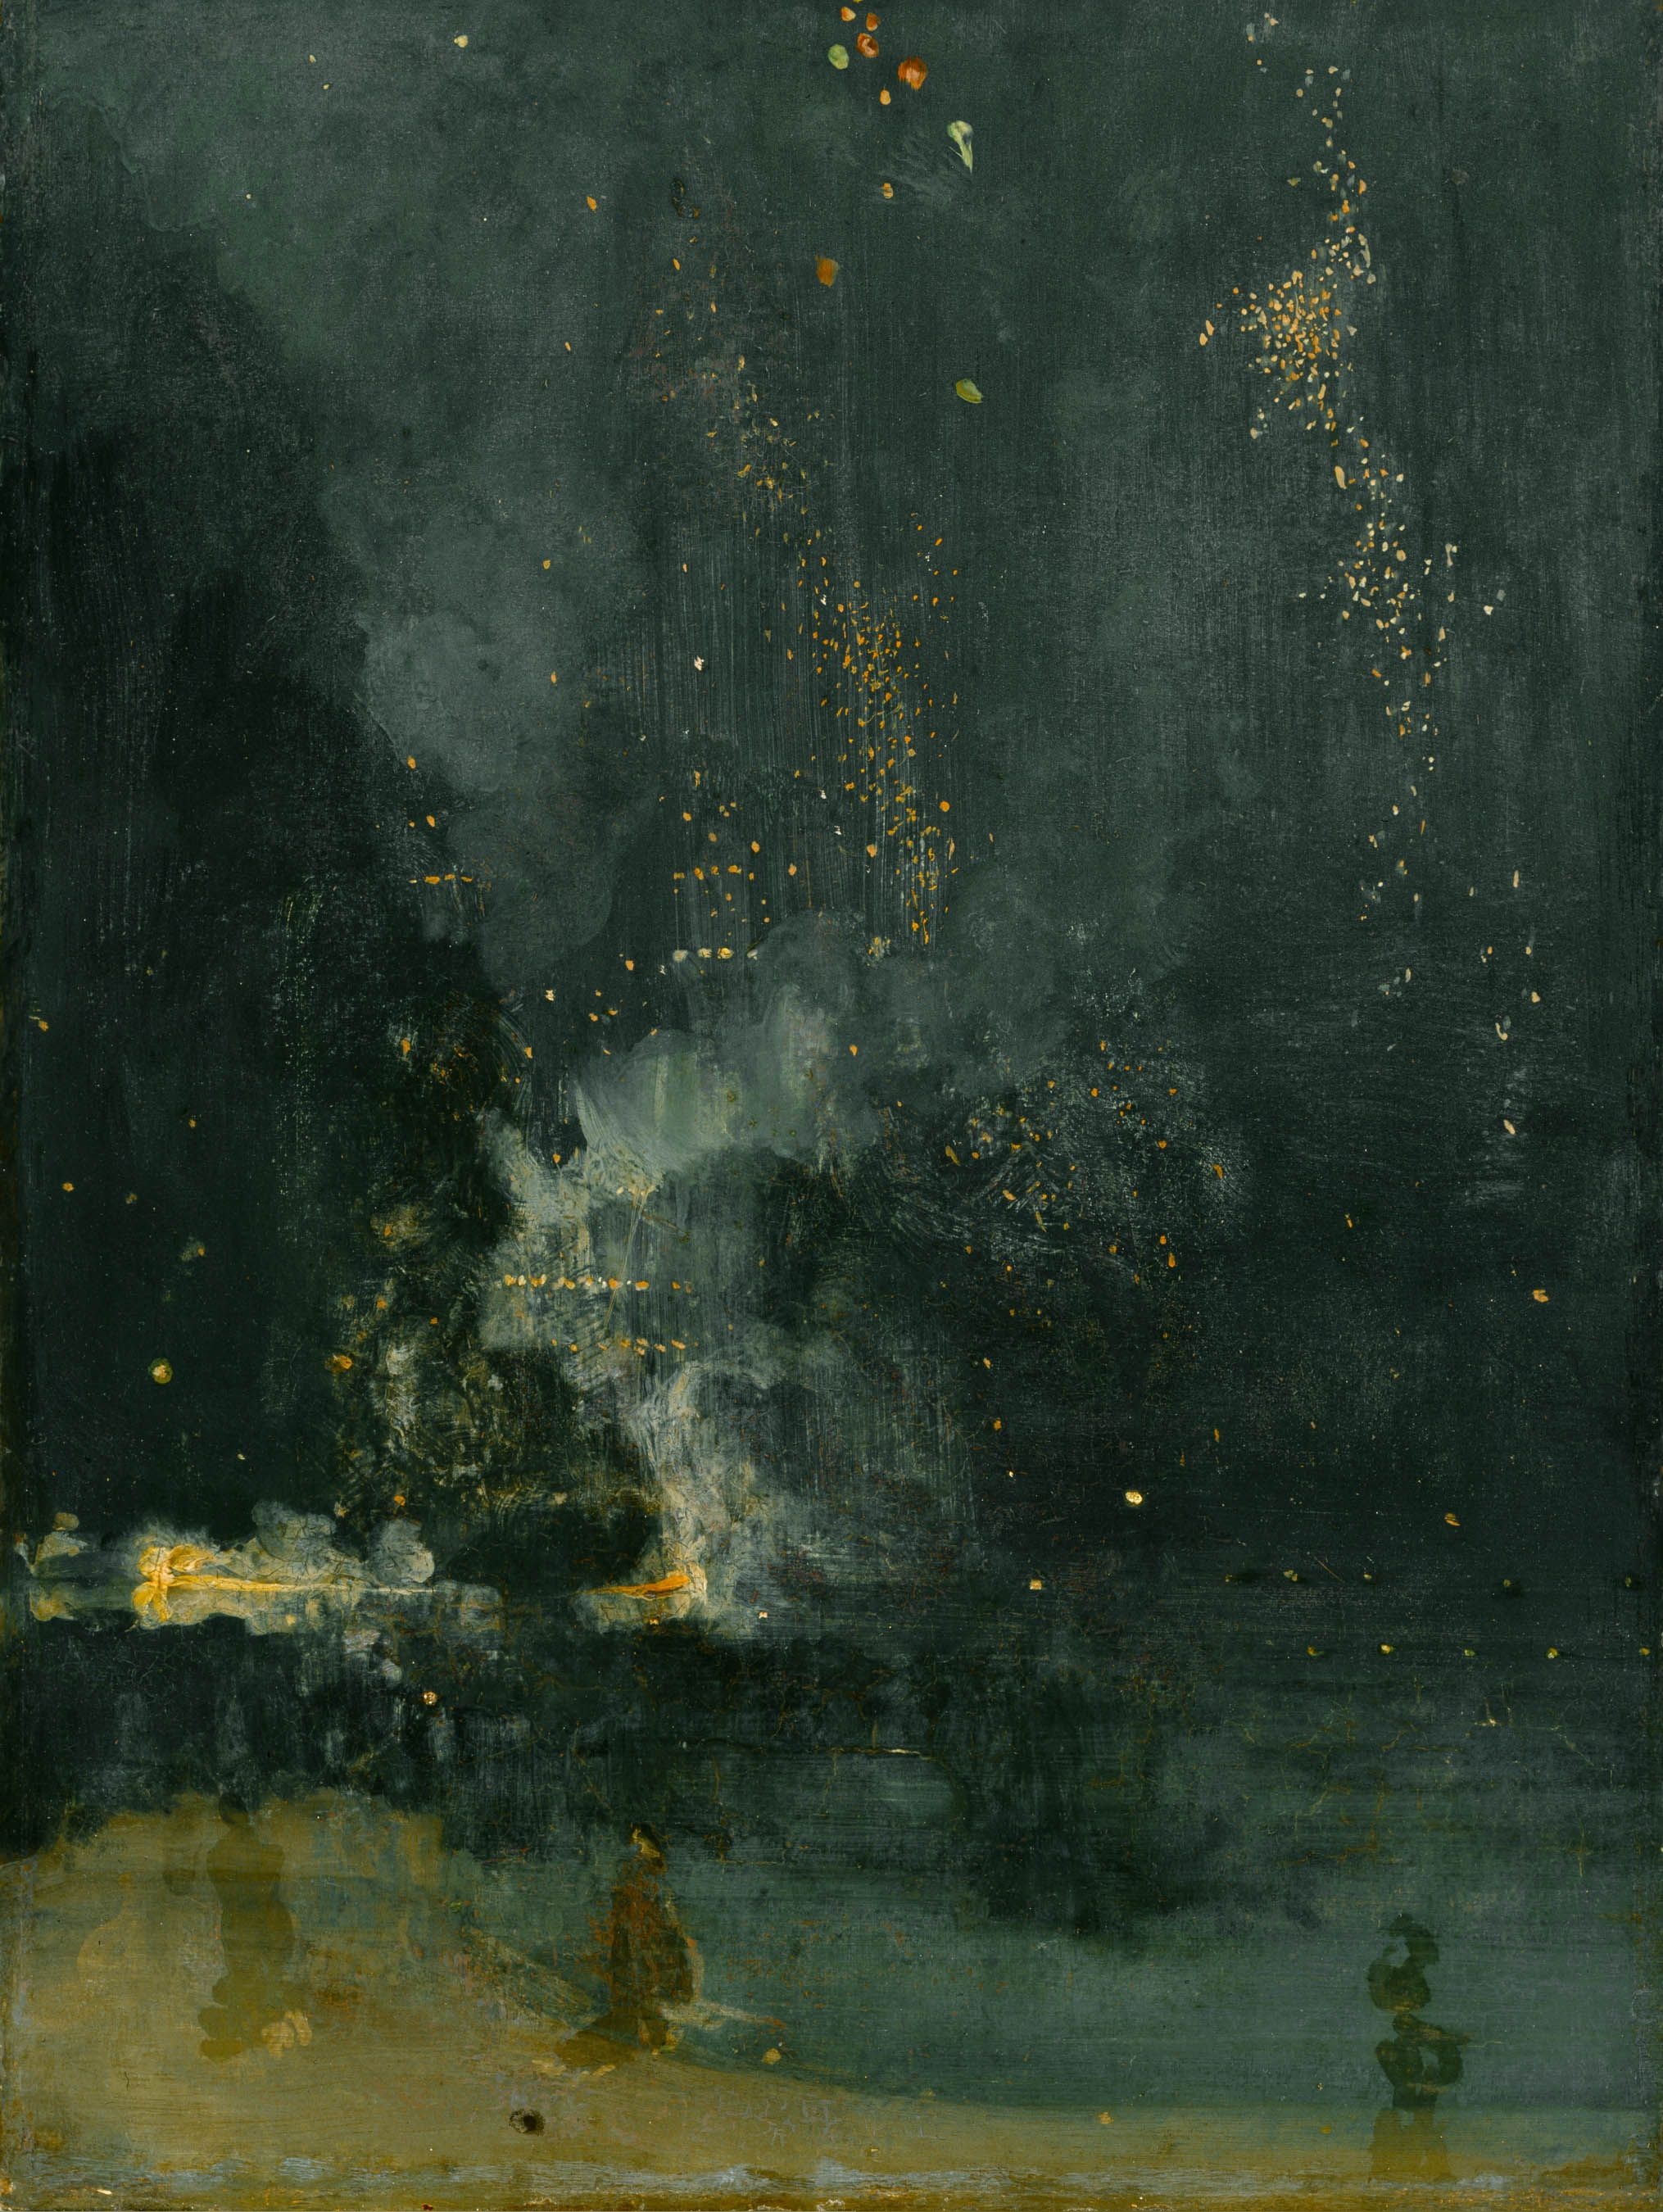 Nocturne in Black and Gold – The Falling Rocket (c. 1872-5) by James Whistler